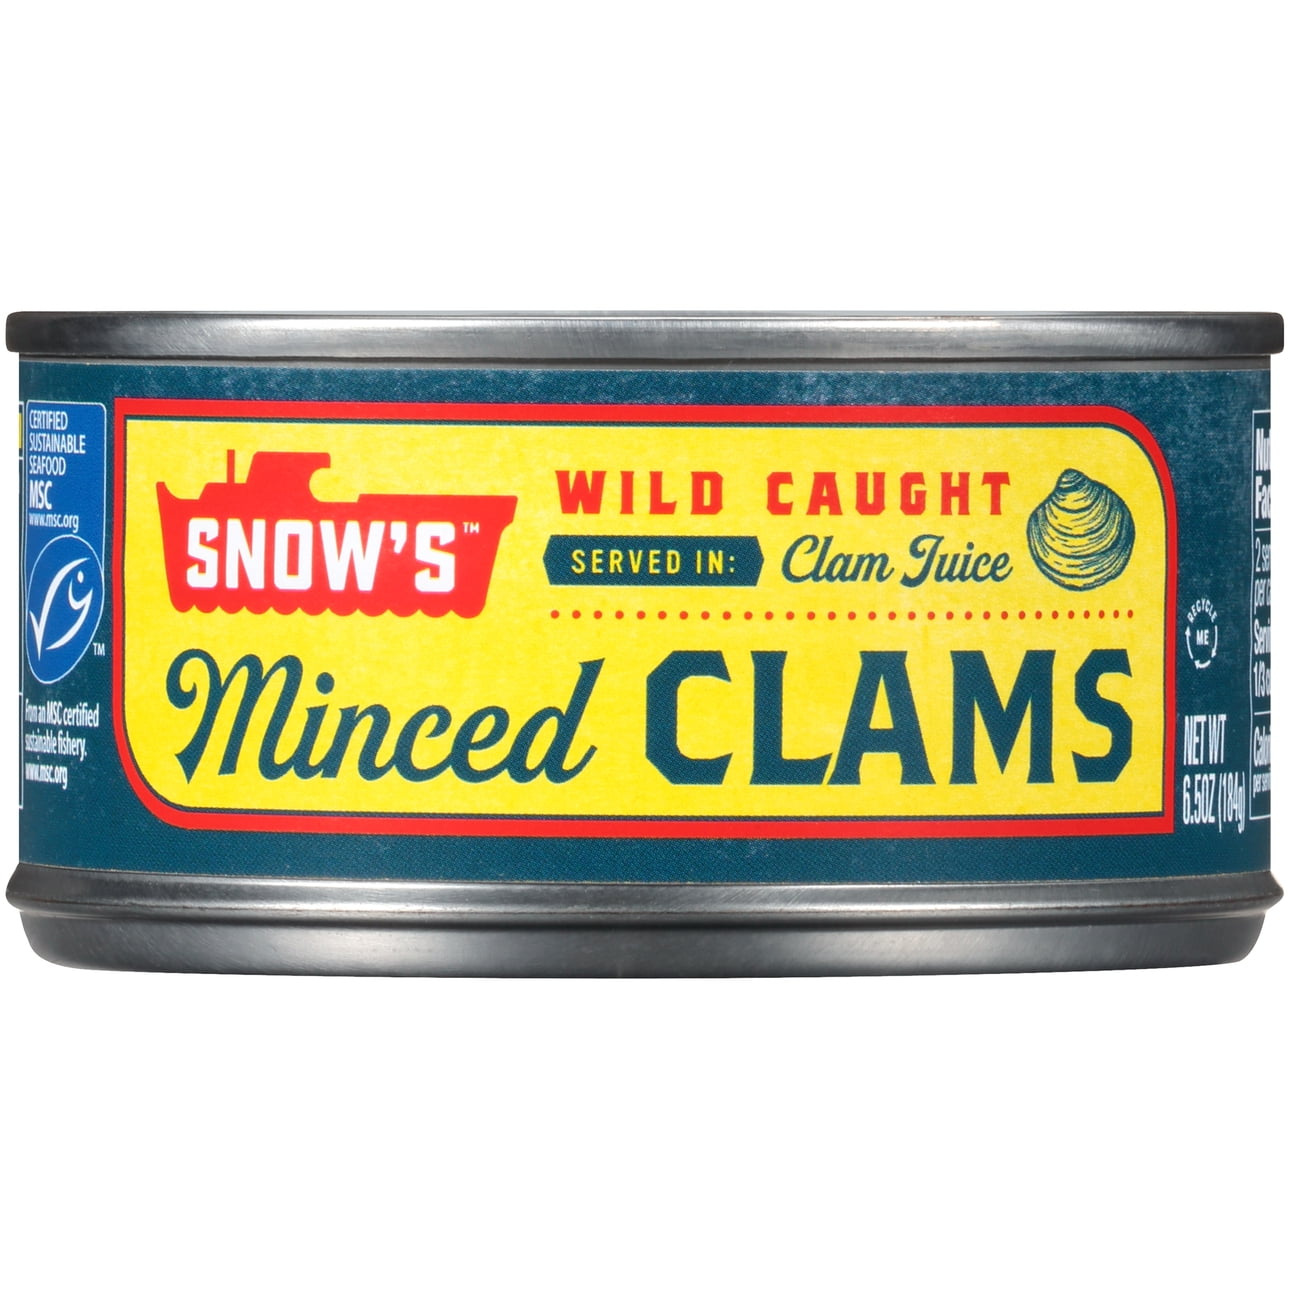 Snow's Minced Clams in Clam Juice, oz -